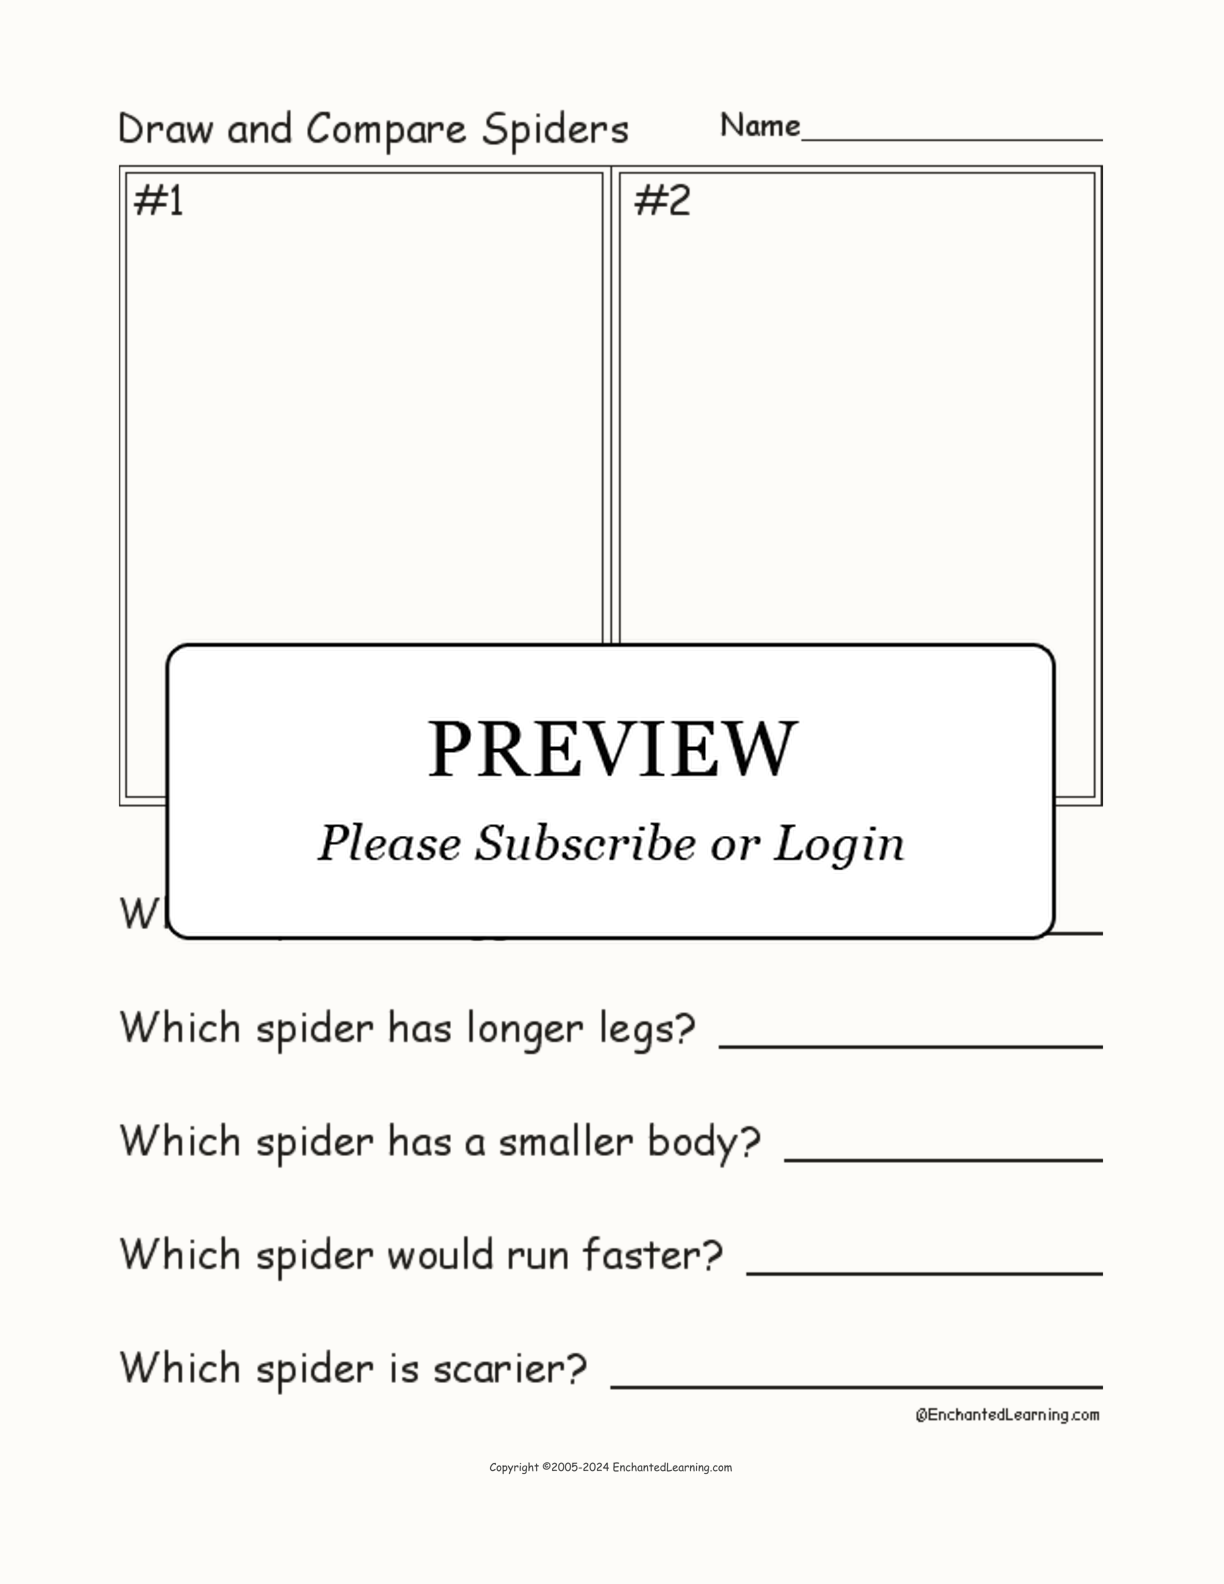 Draw and Compare Spiders interactive worksheet page 1